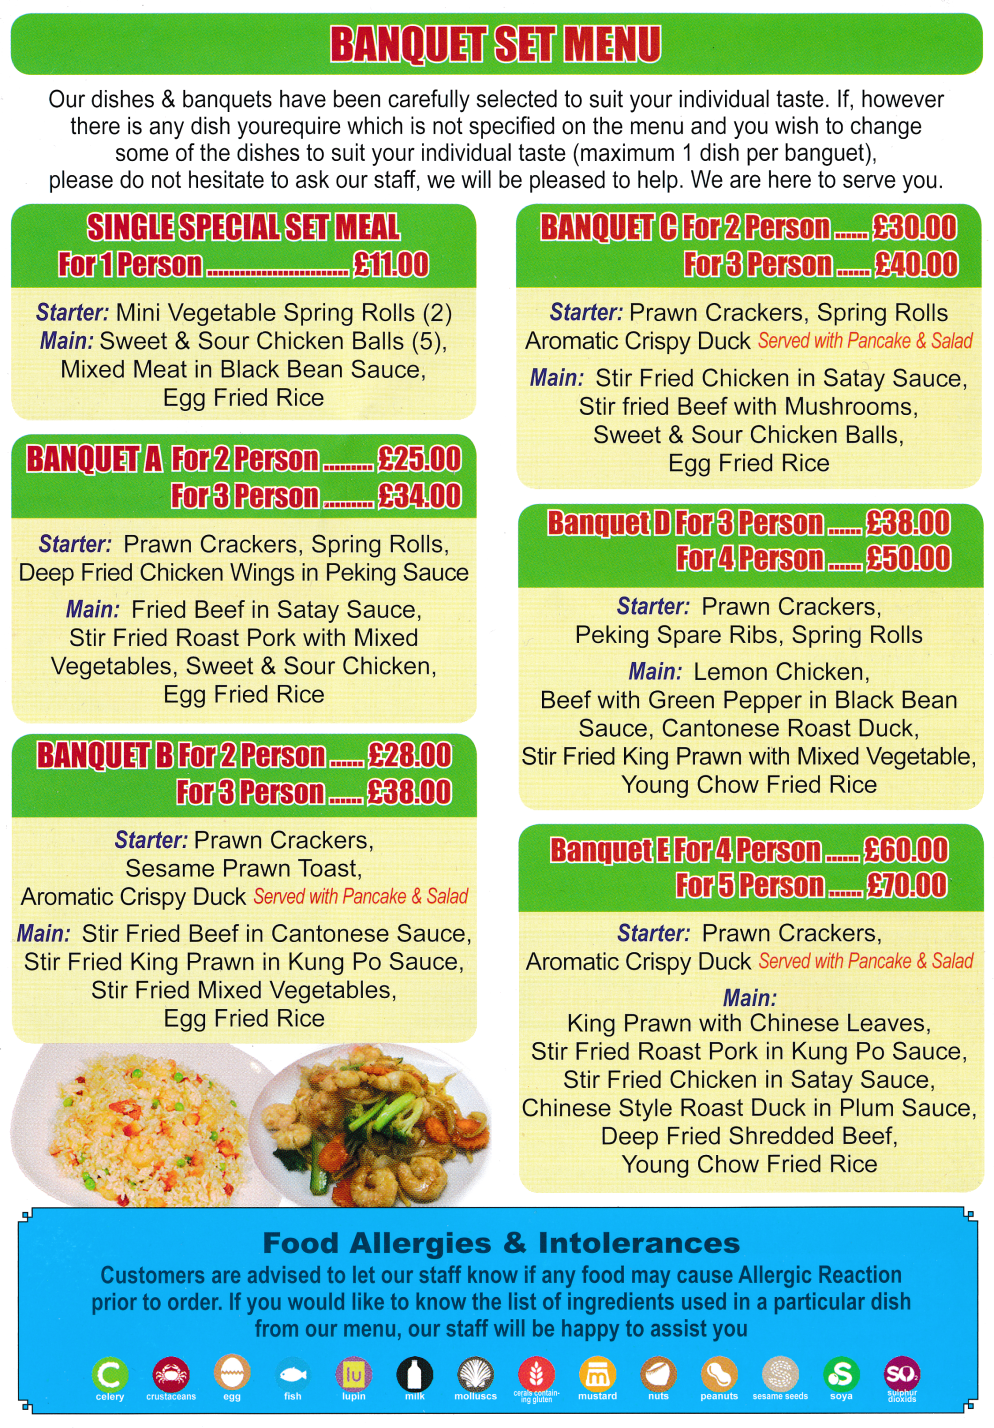 Menu for Lucky Star - Banquet Set Menu - Chinese food delivered in Alfreton, Somercotes, Leabrooks, South Normanton, Swanwick..